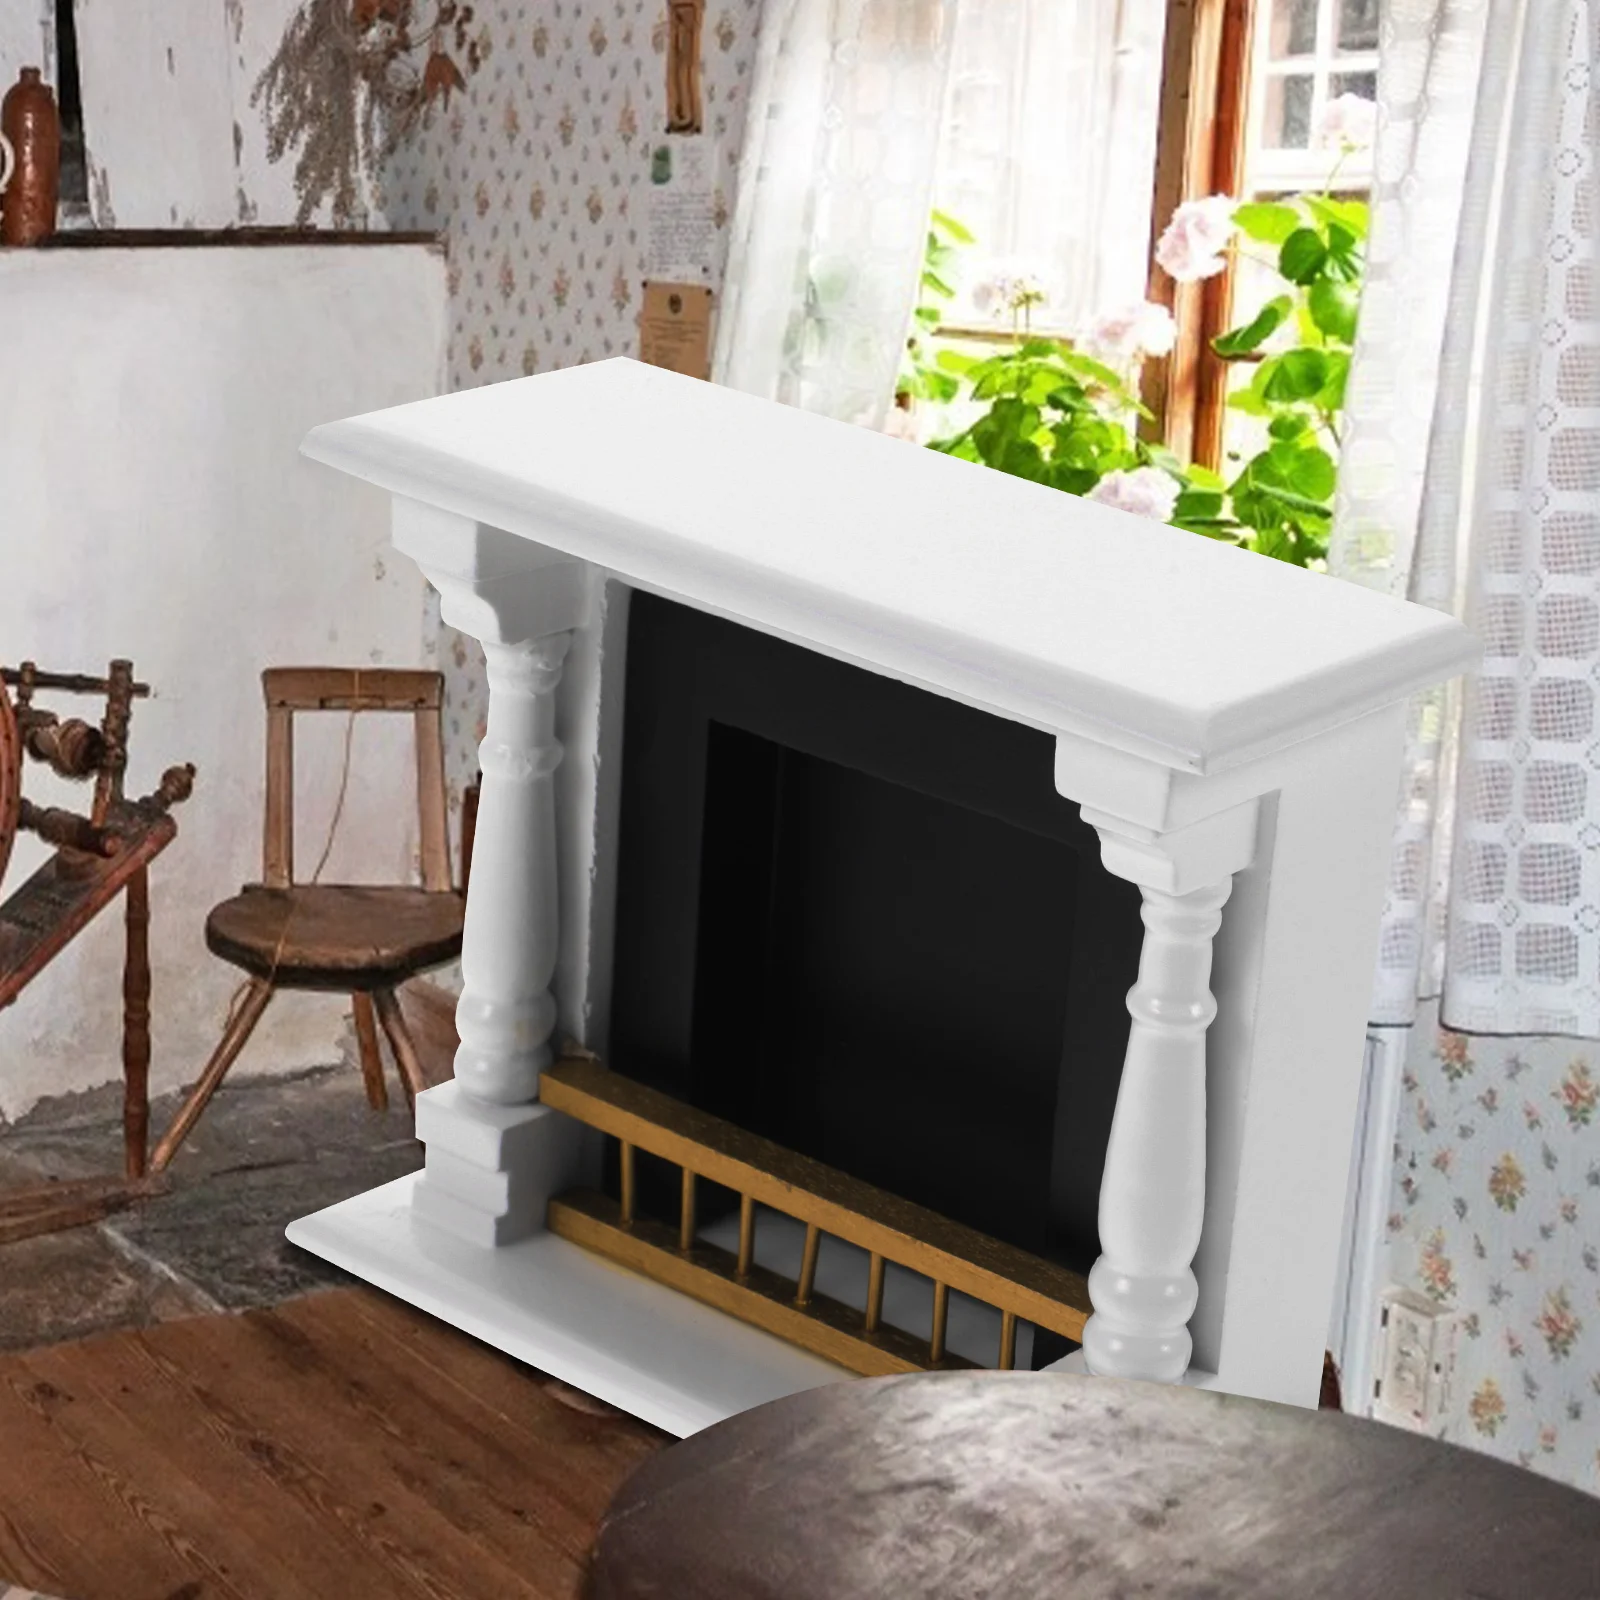 Dollhouse Fireplace Miniature Model 1 6 Scale Furniture Vintage Toys Wood - £10.83 GBP